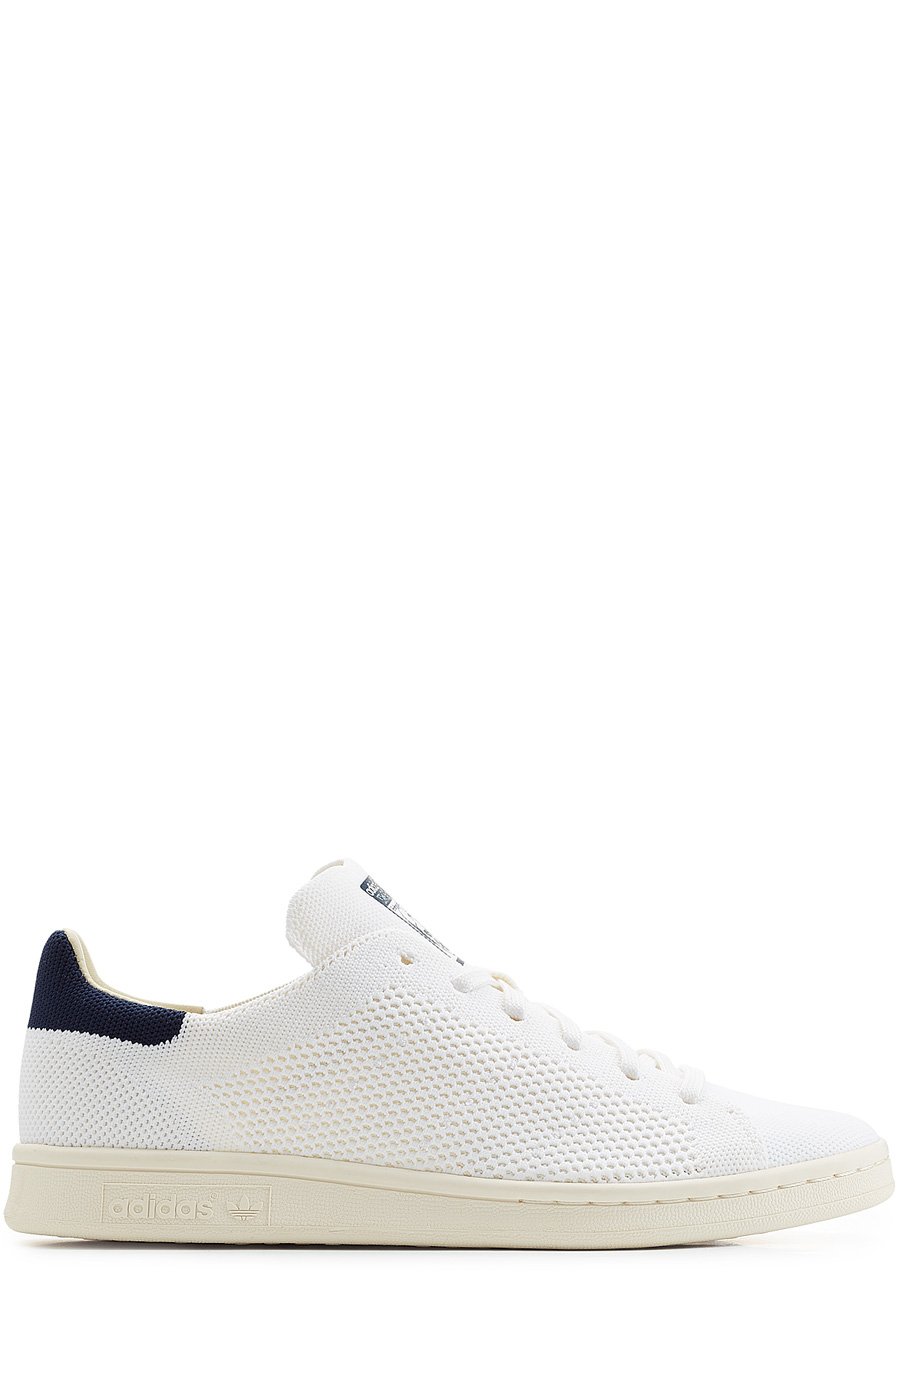 Adidas Originals Stan Smith Perforated Sneakers In White | ModeSens